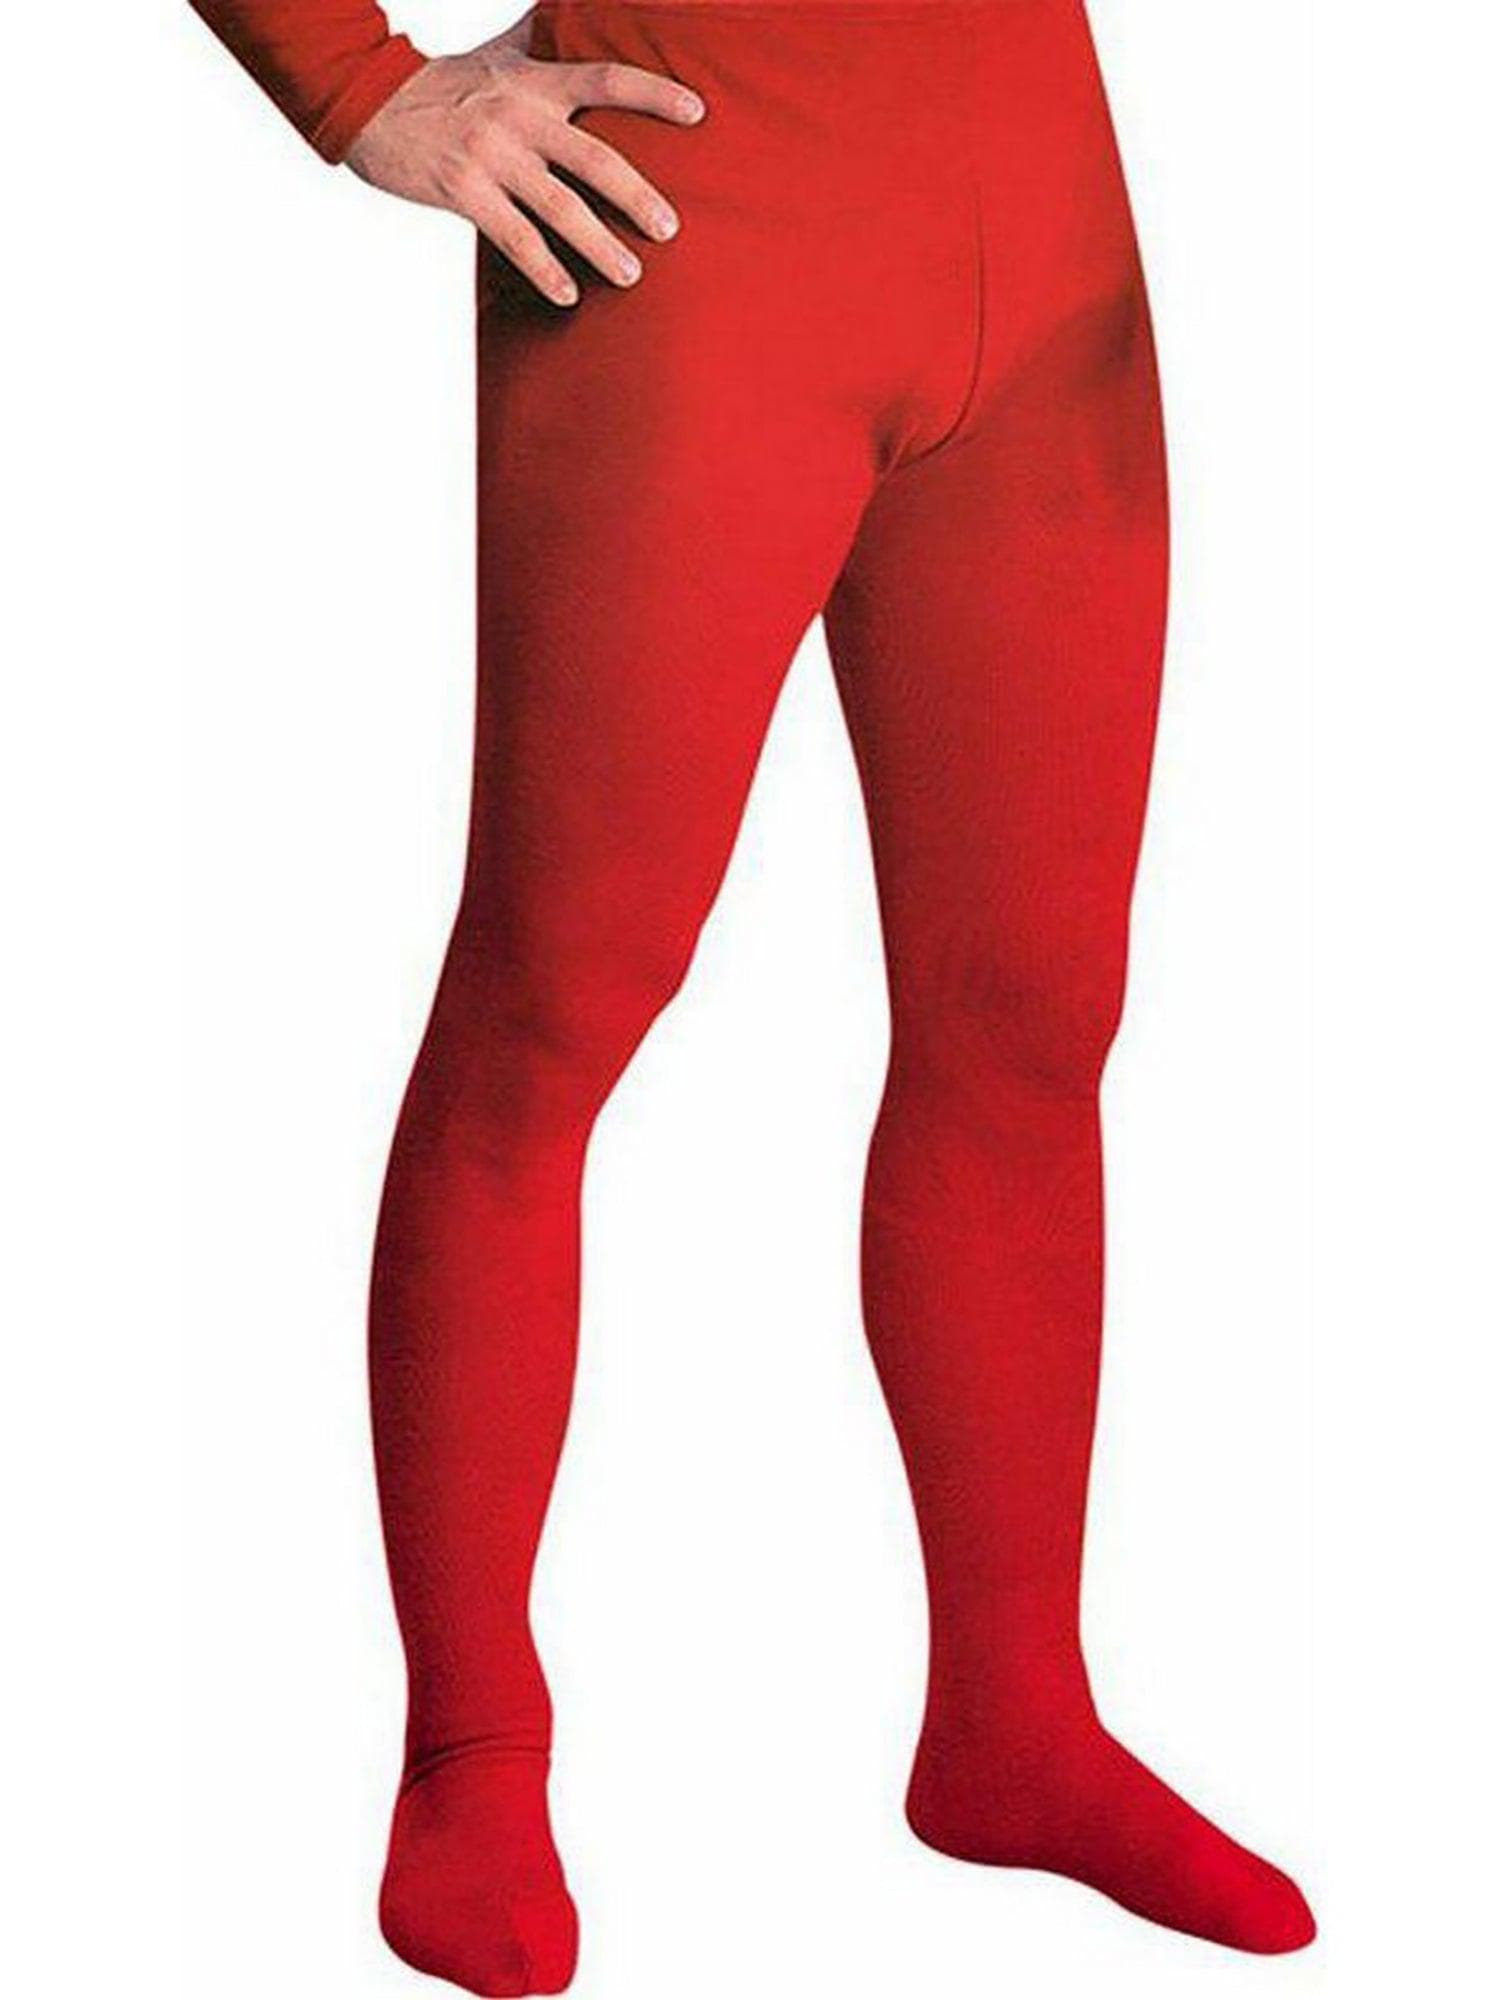 Mens Red Professional Tights - costumes.com